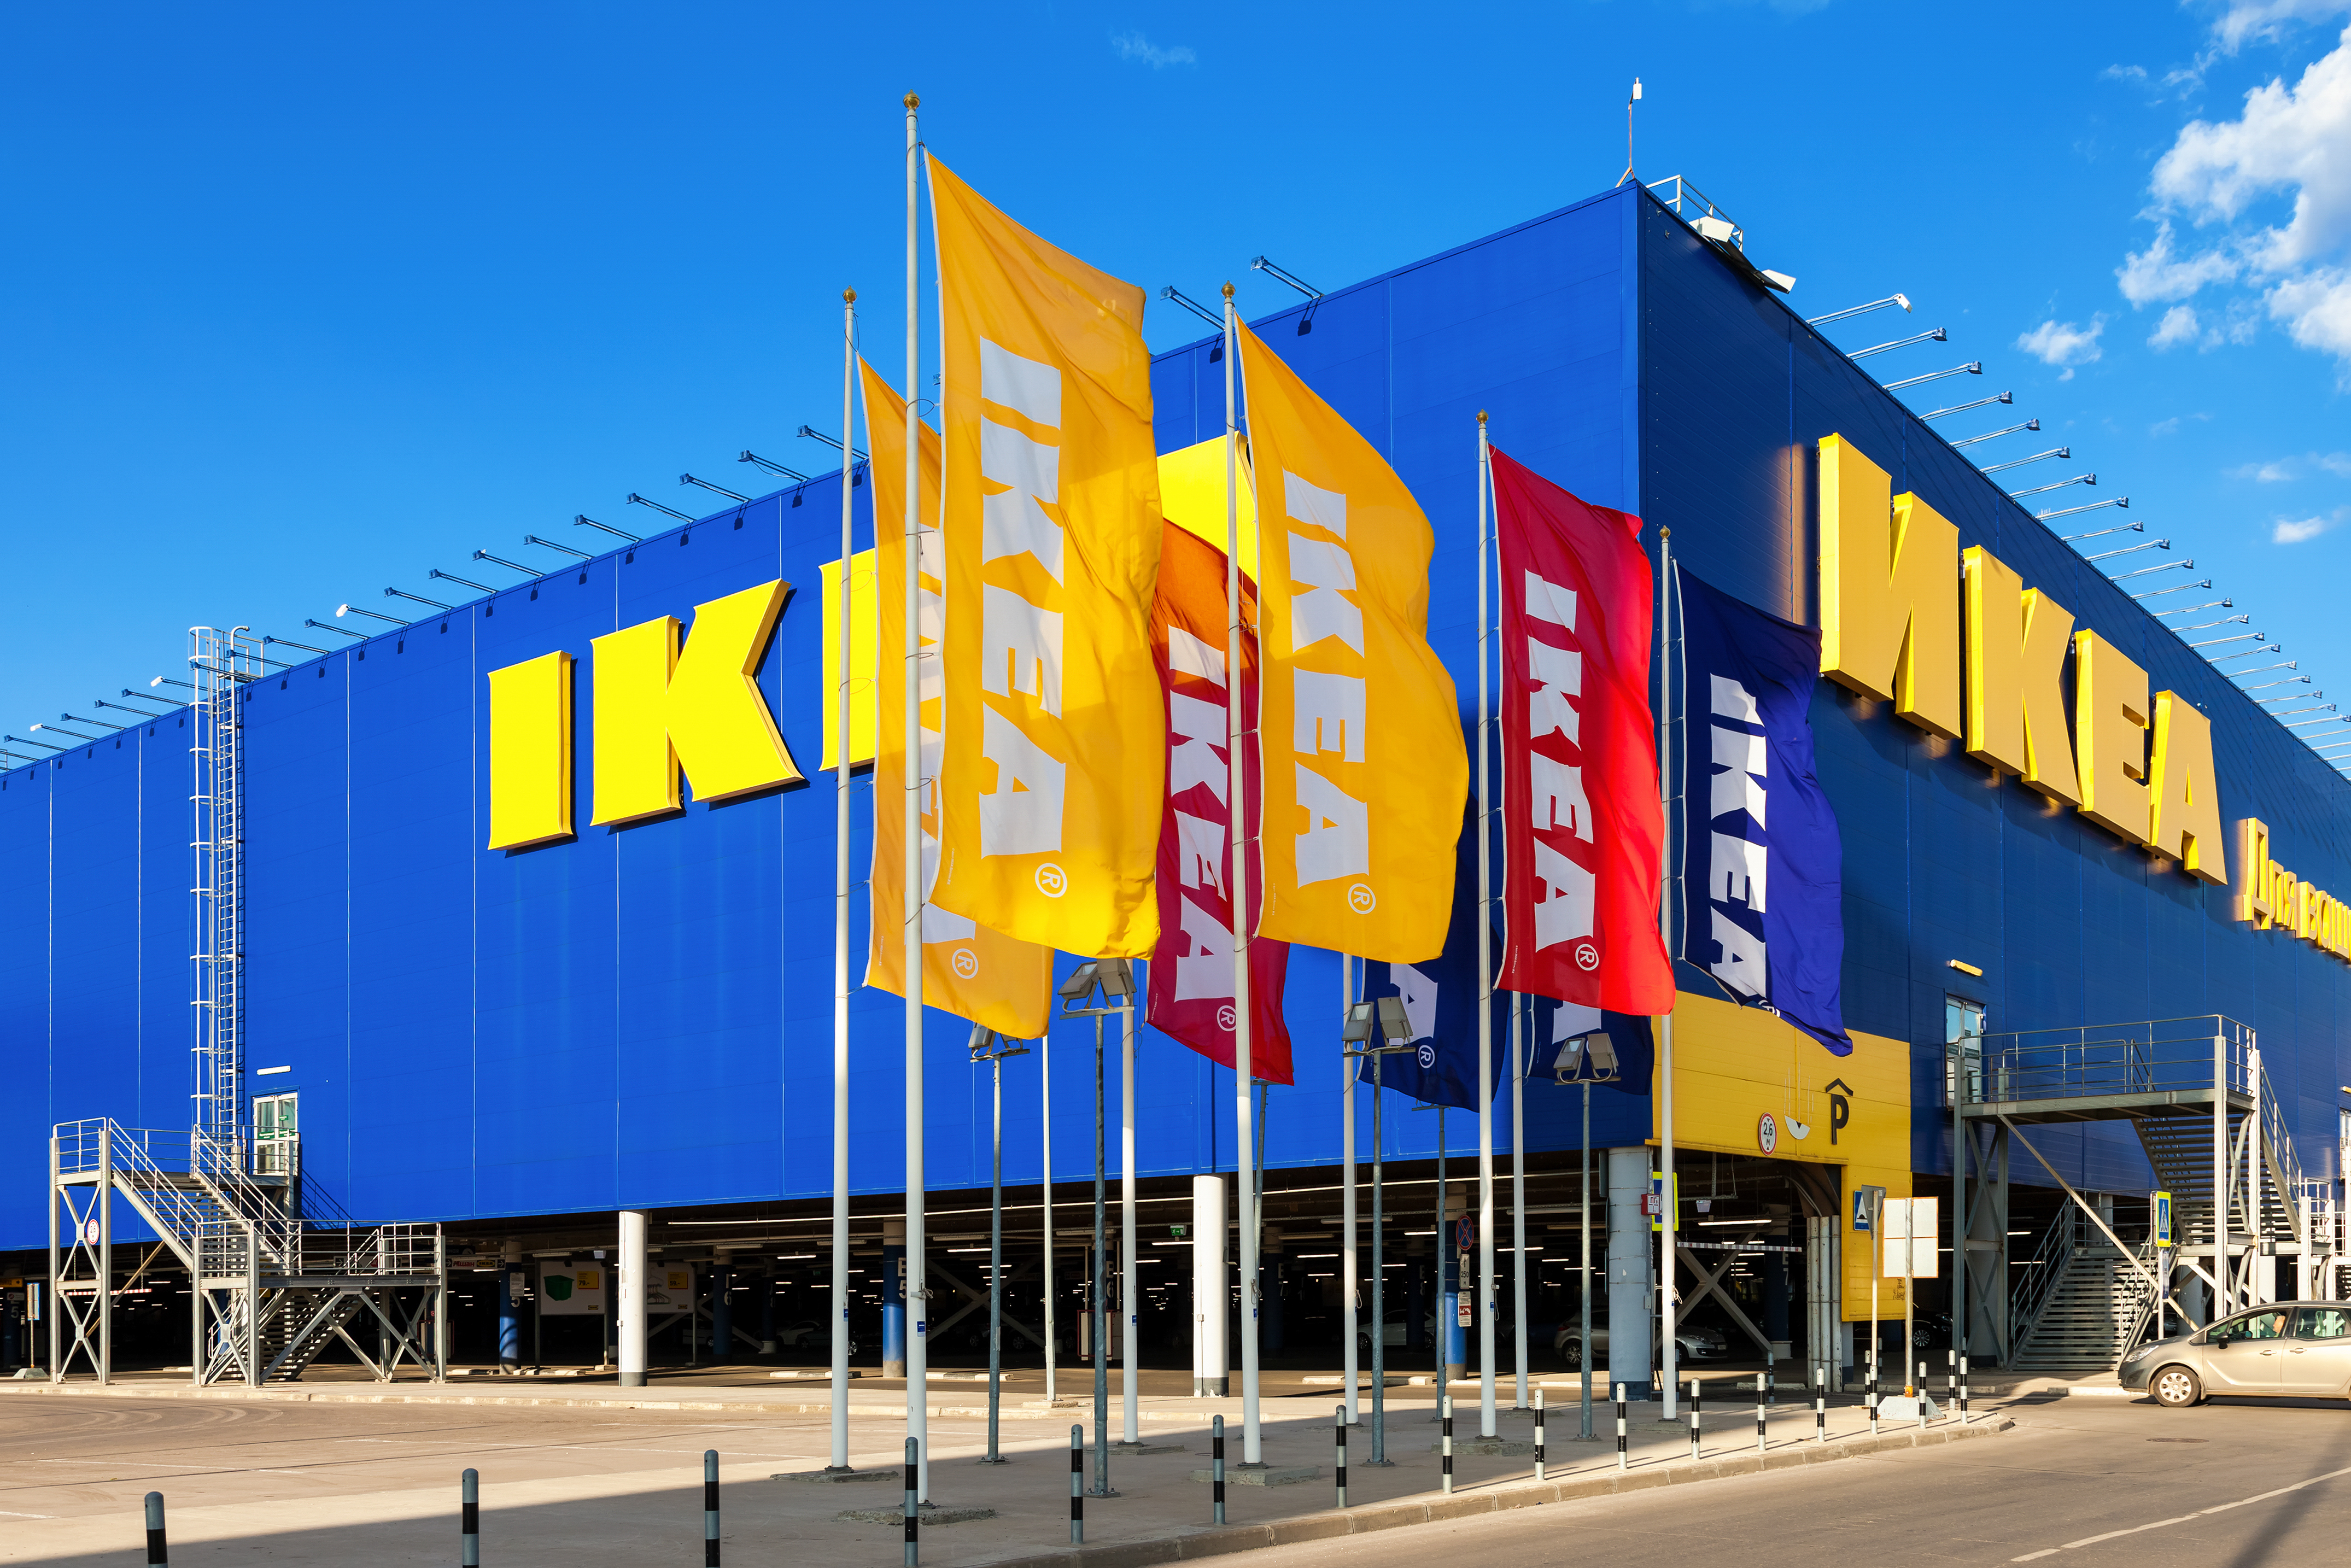 World's Biggest Ikea Opens in Philippines as Part of Global Push